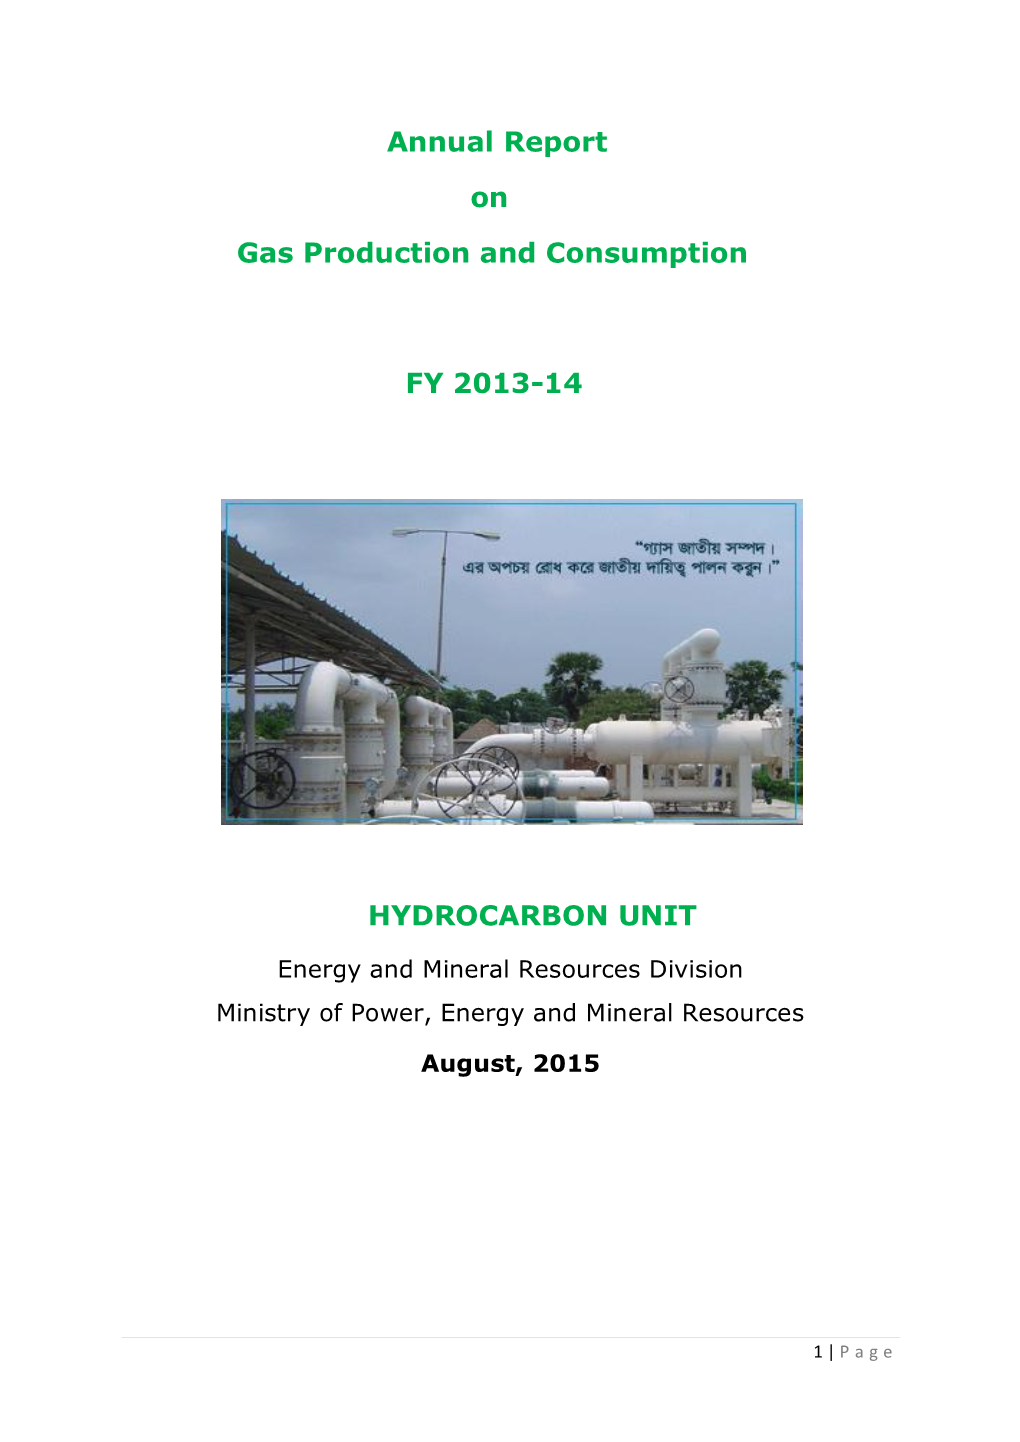 Annual Report on Gas Production and Consumption FY 2013-14